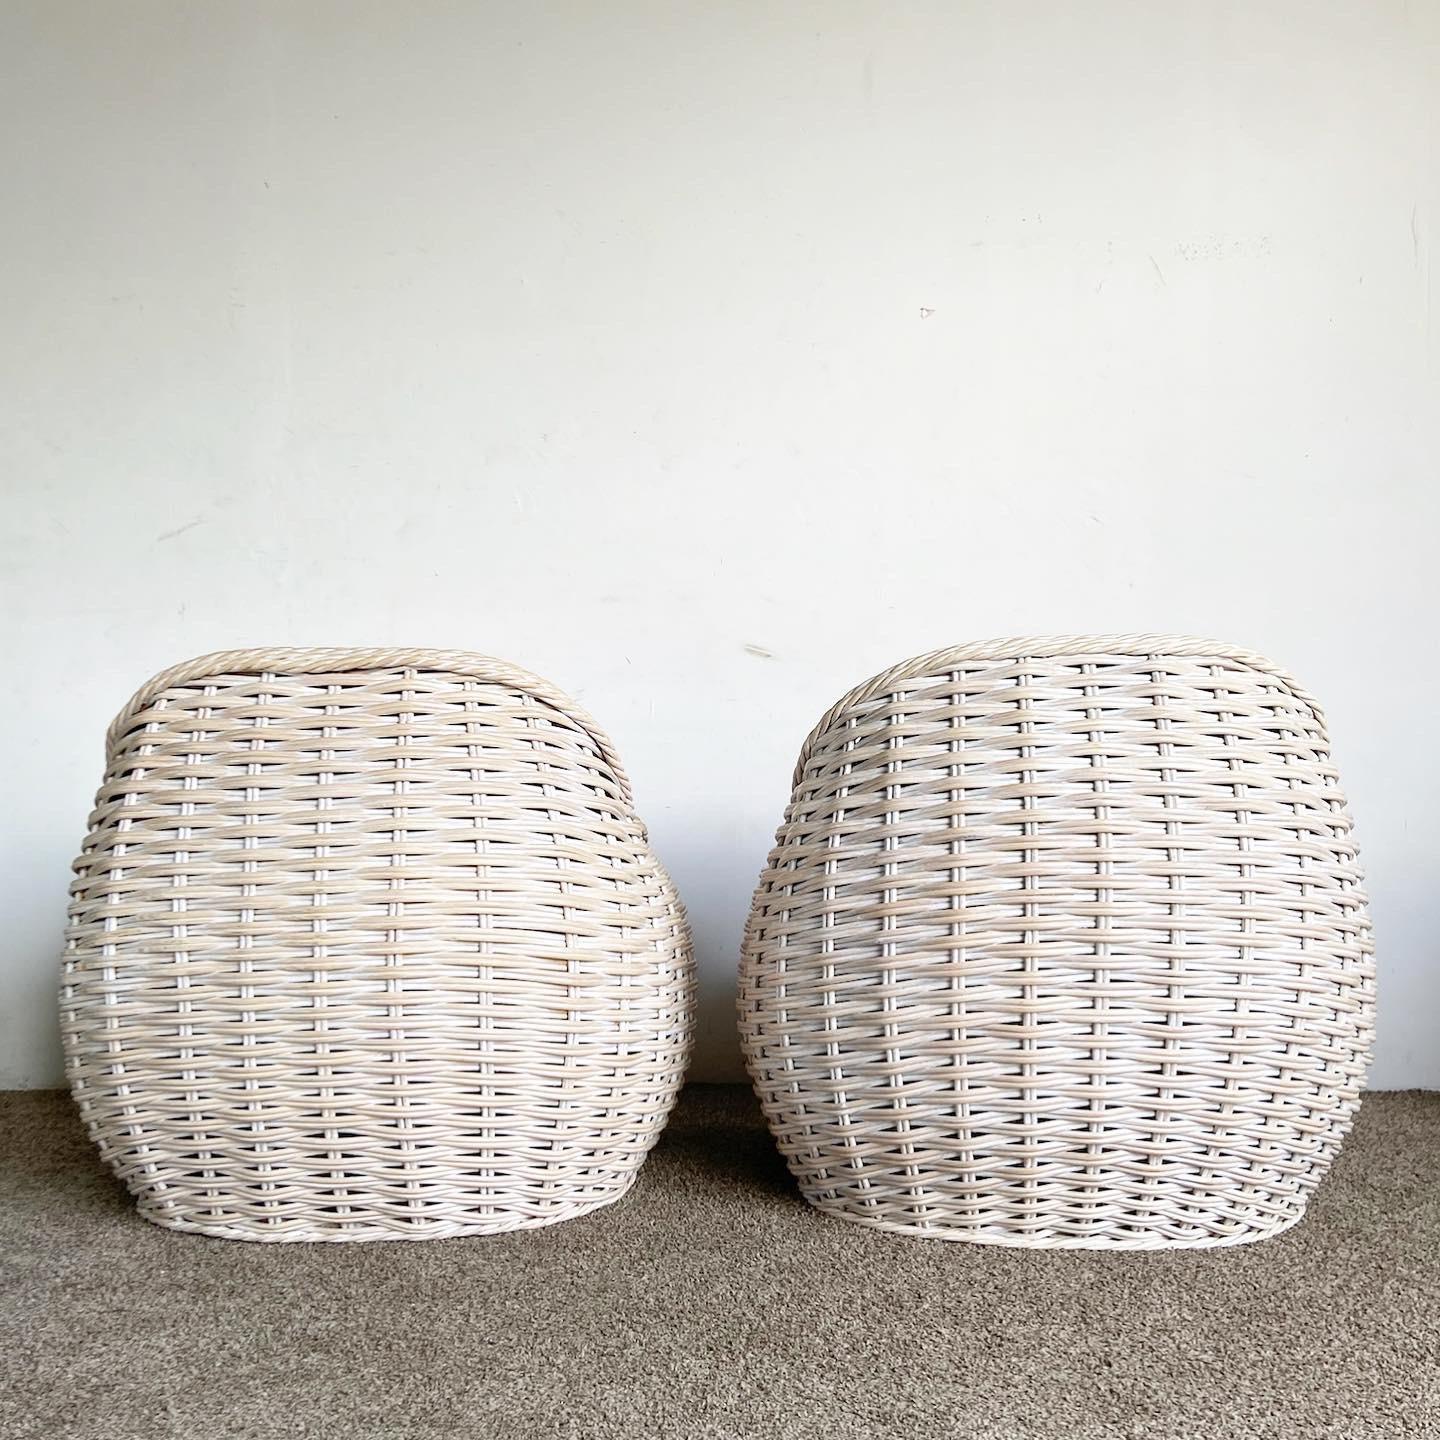 Philippine Boho Chic Woven Wicker Bulbous Lounge Chairs - a Pair For Sale